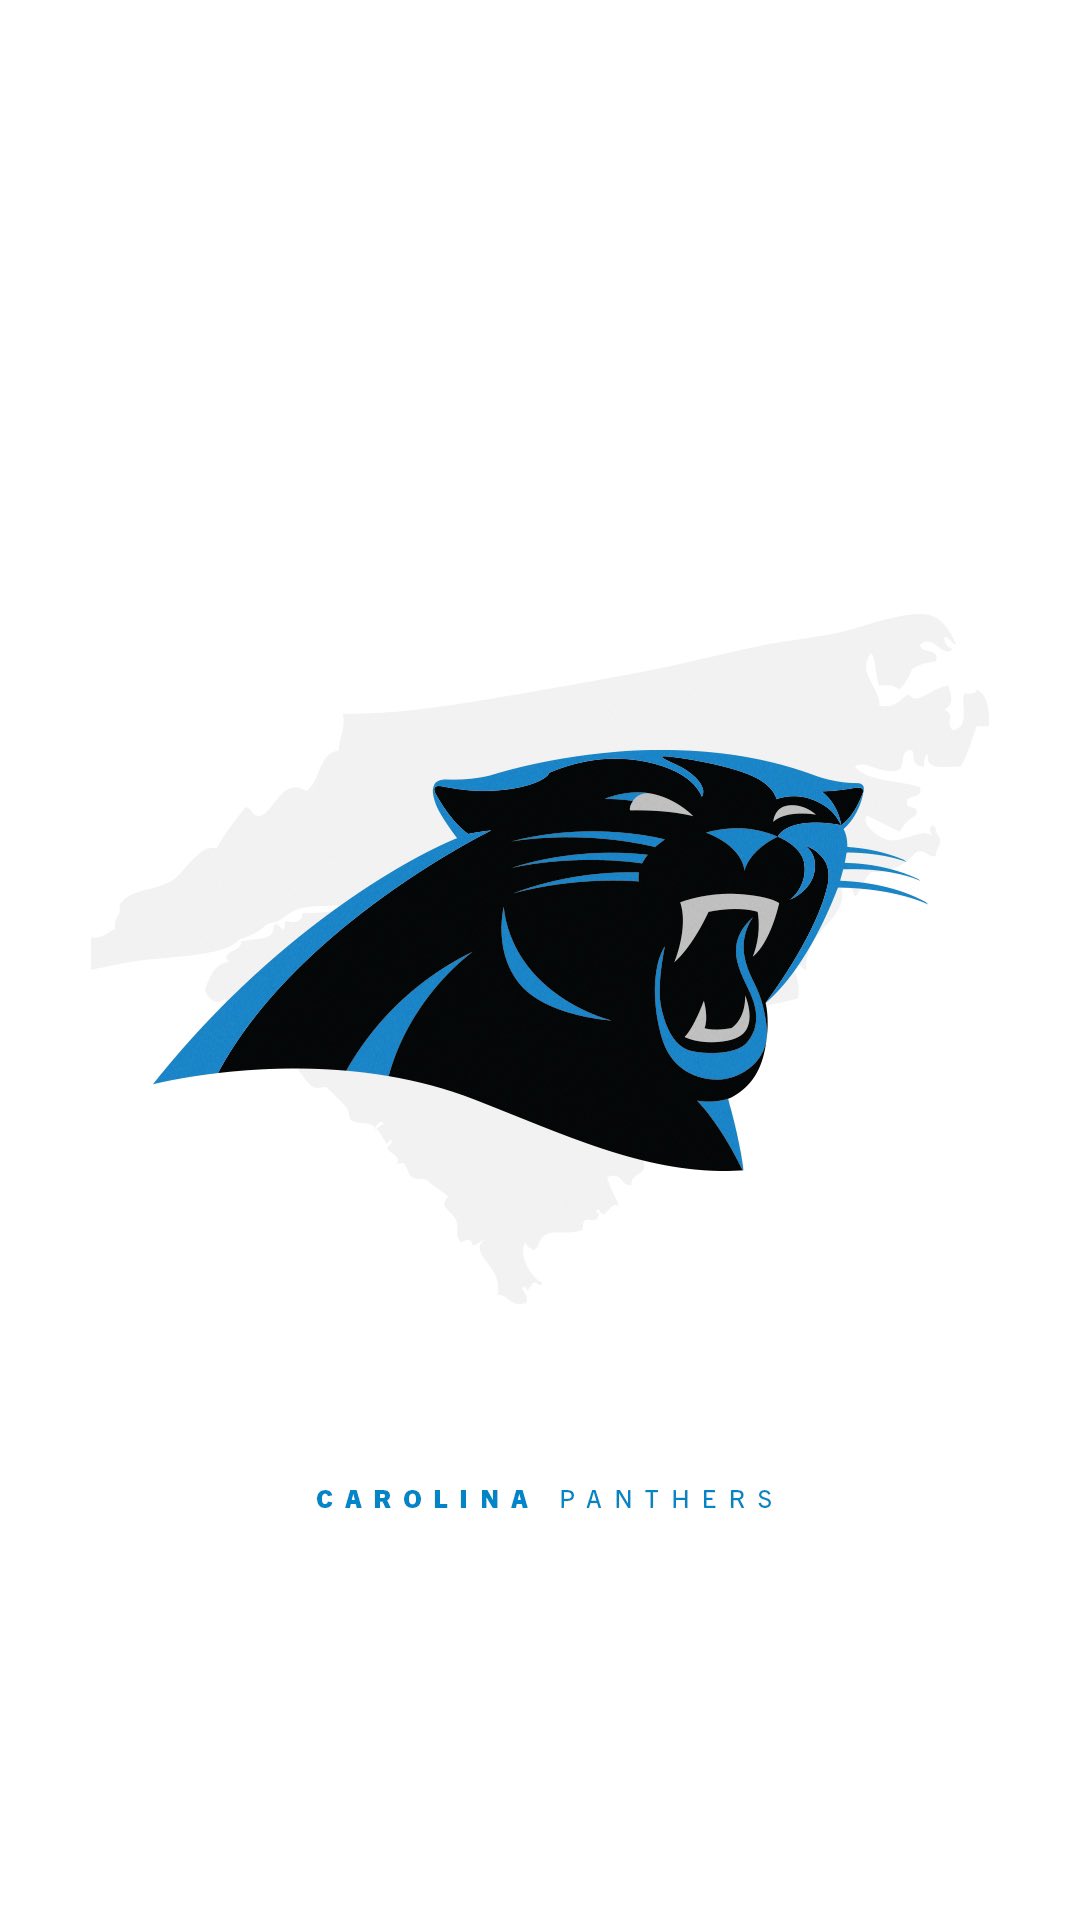 Carolina panthers on glad we could get these wallpapers to ya ð httpstcopbhkhleckg